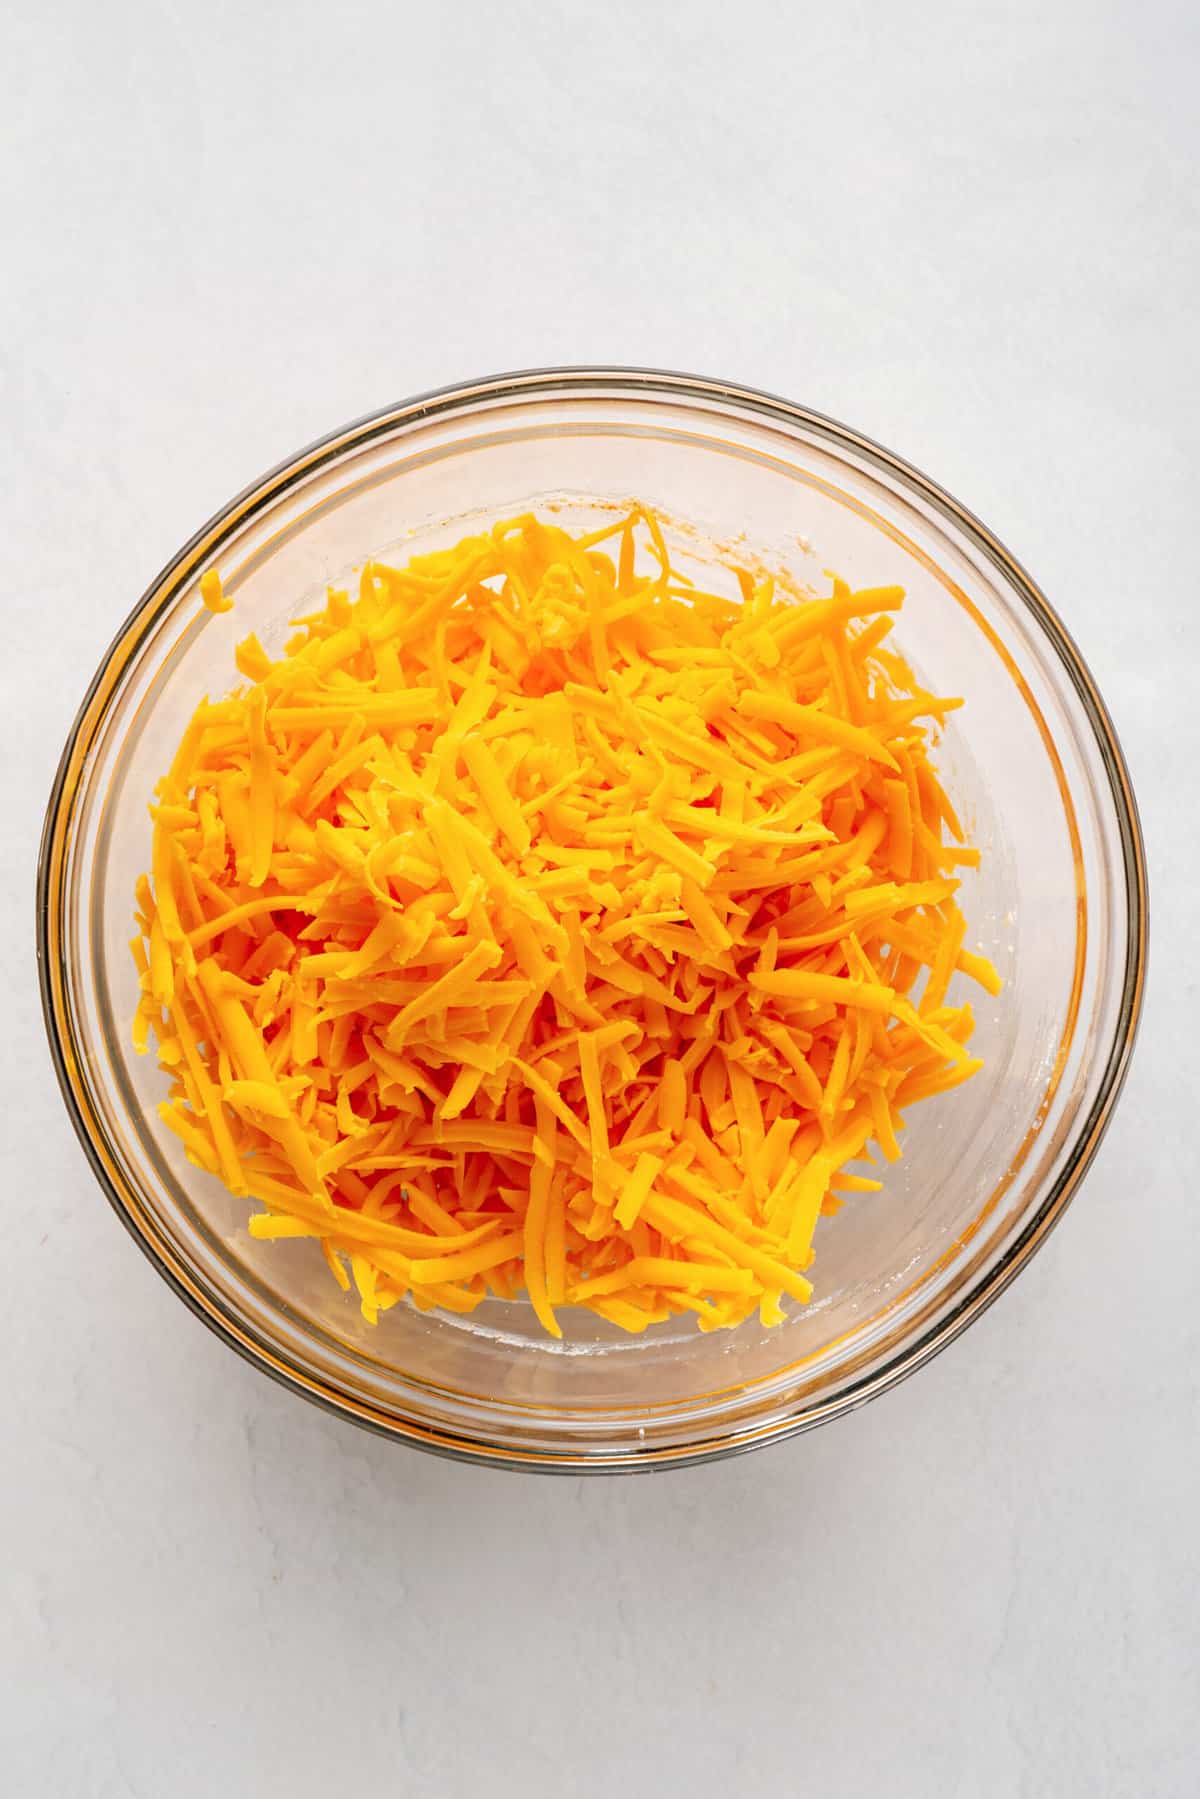 shredded cheddar cheese in a large glass bowl